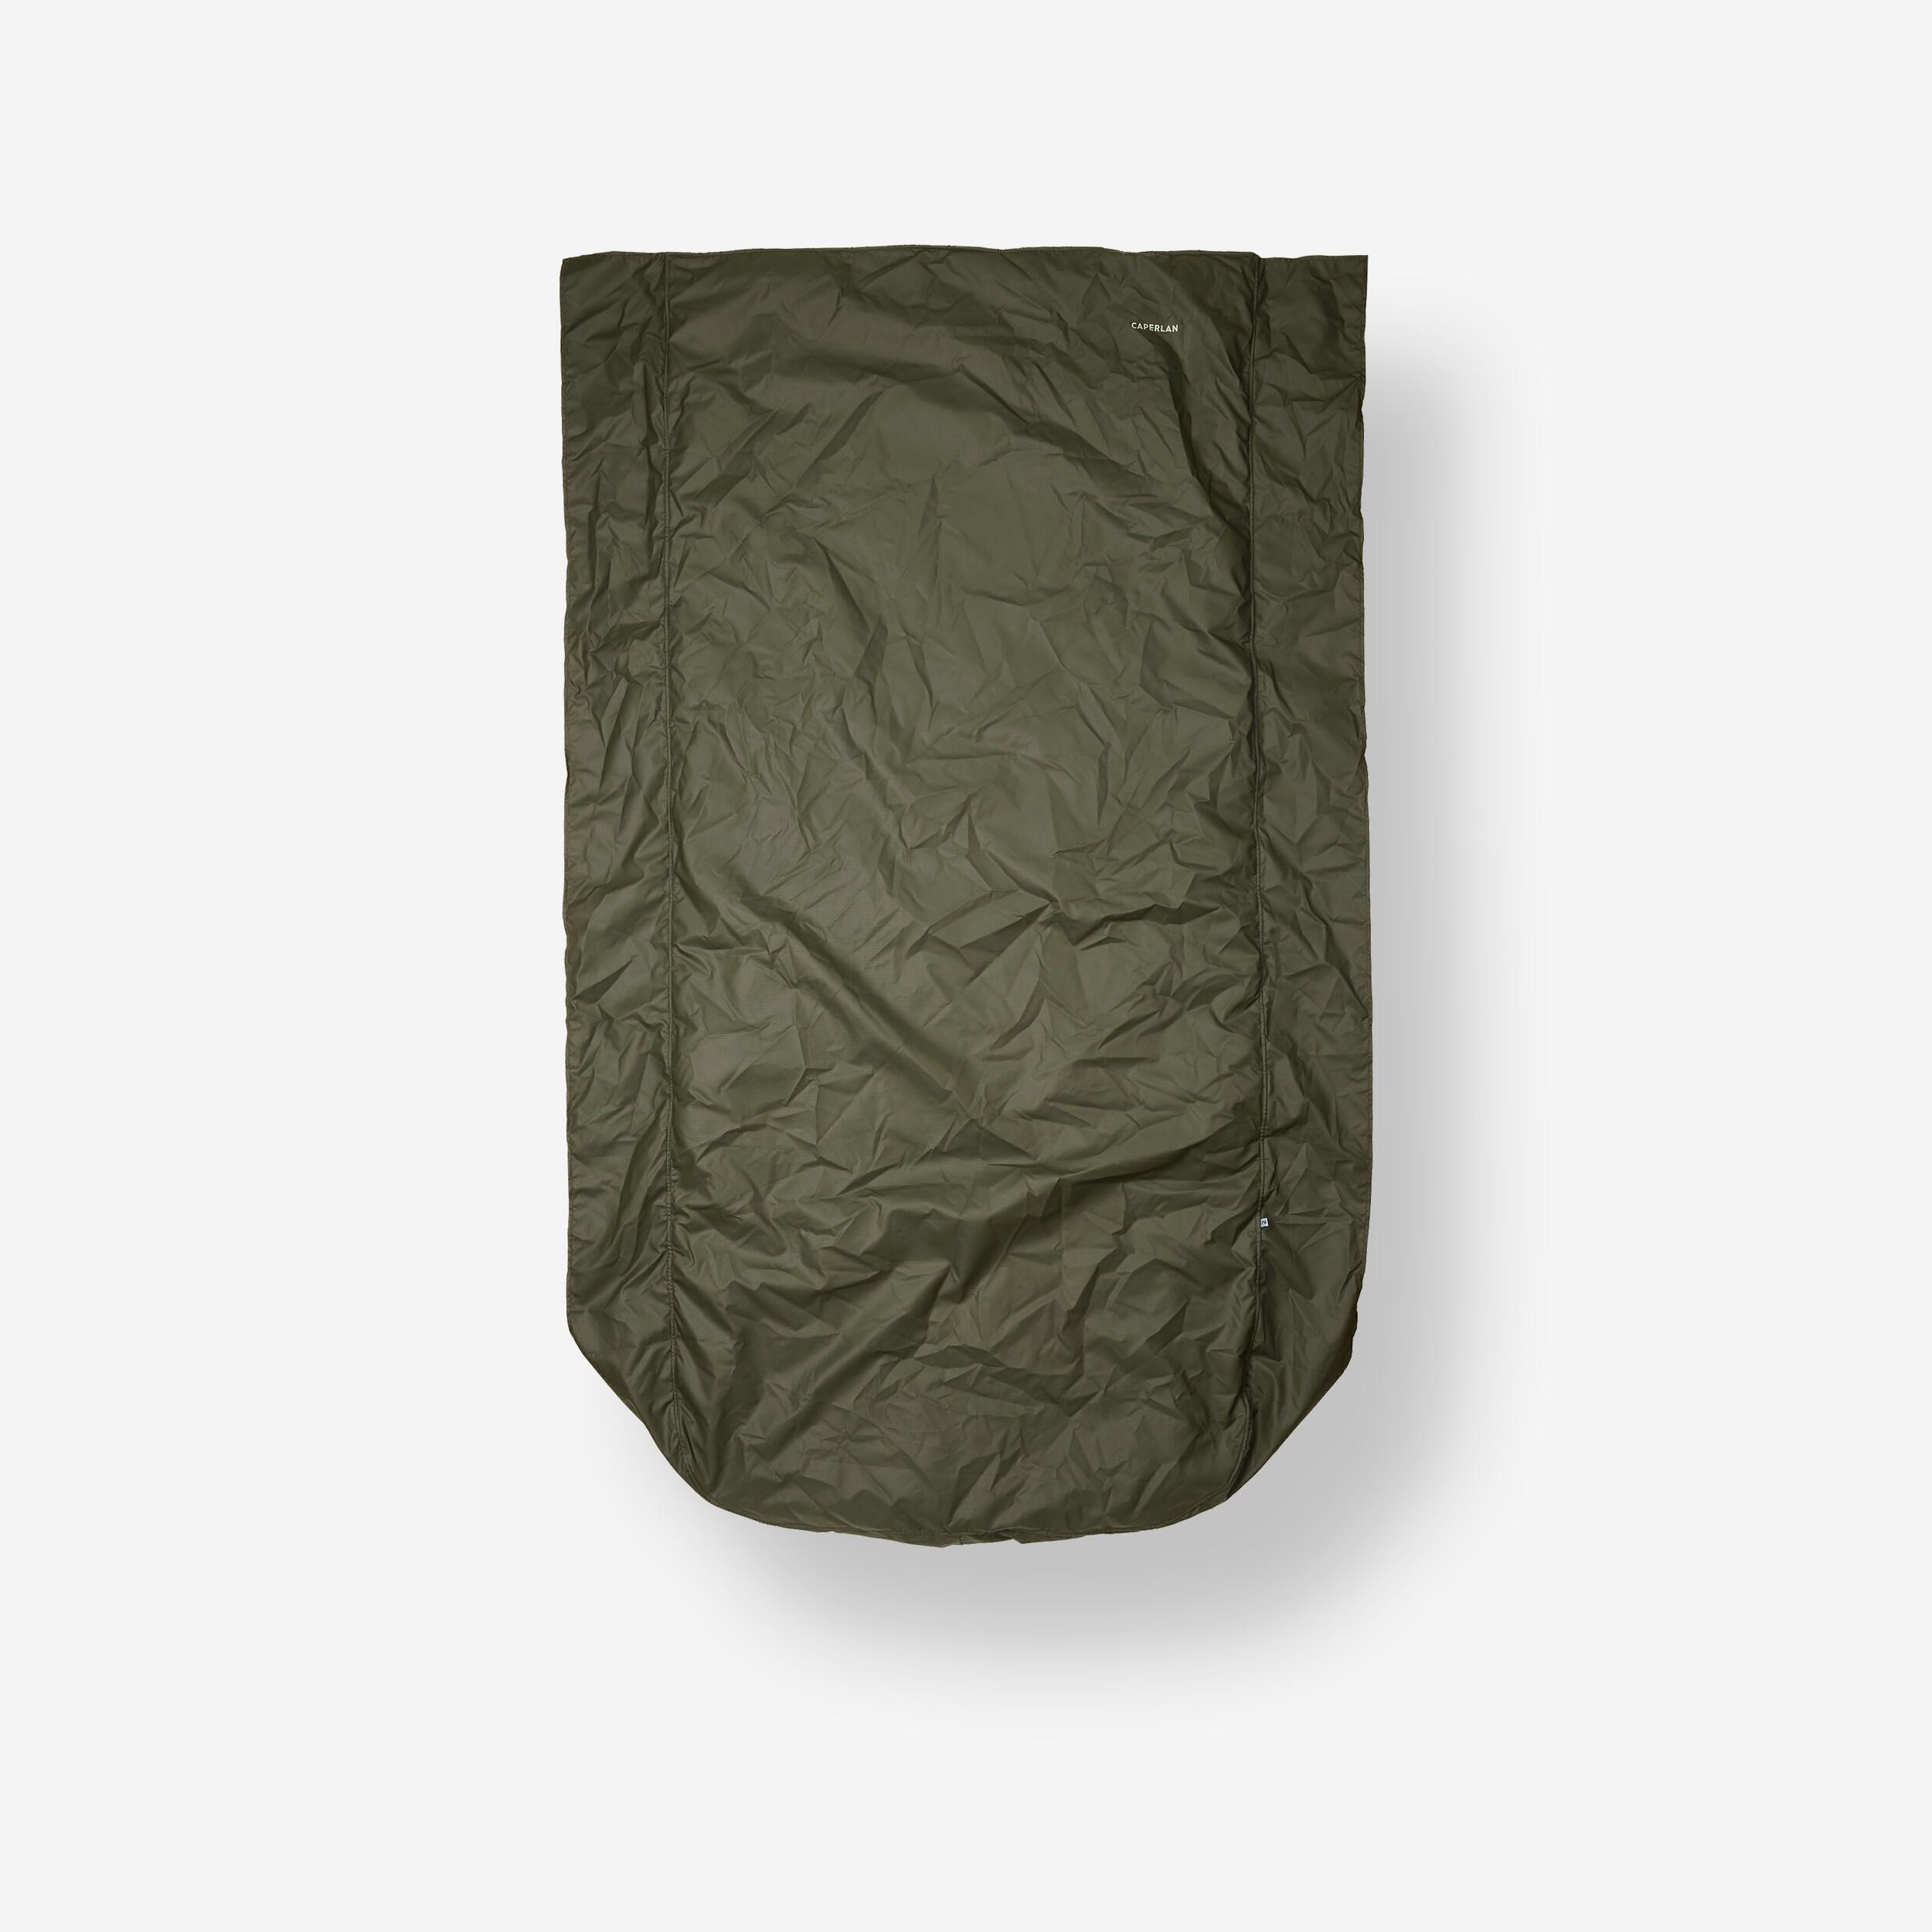 CAPERLAN Water-repellent cover for carp fishing